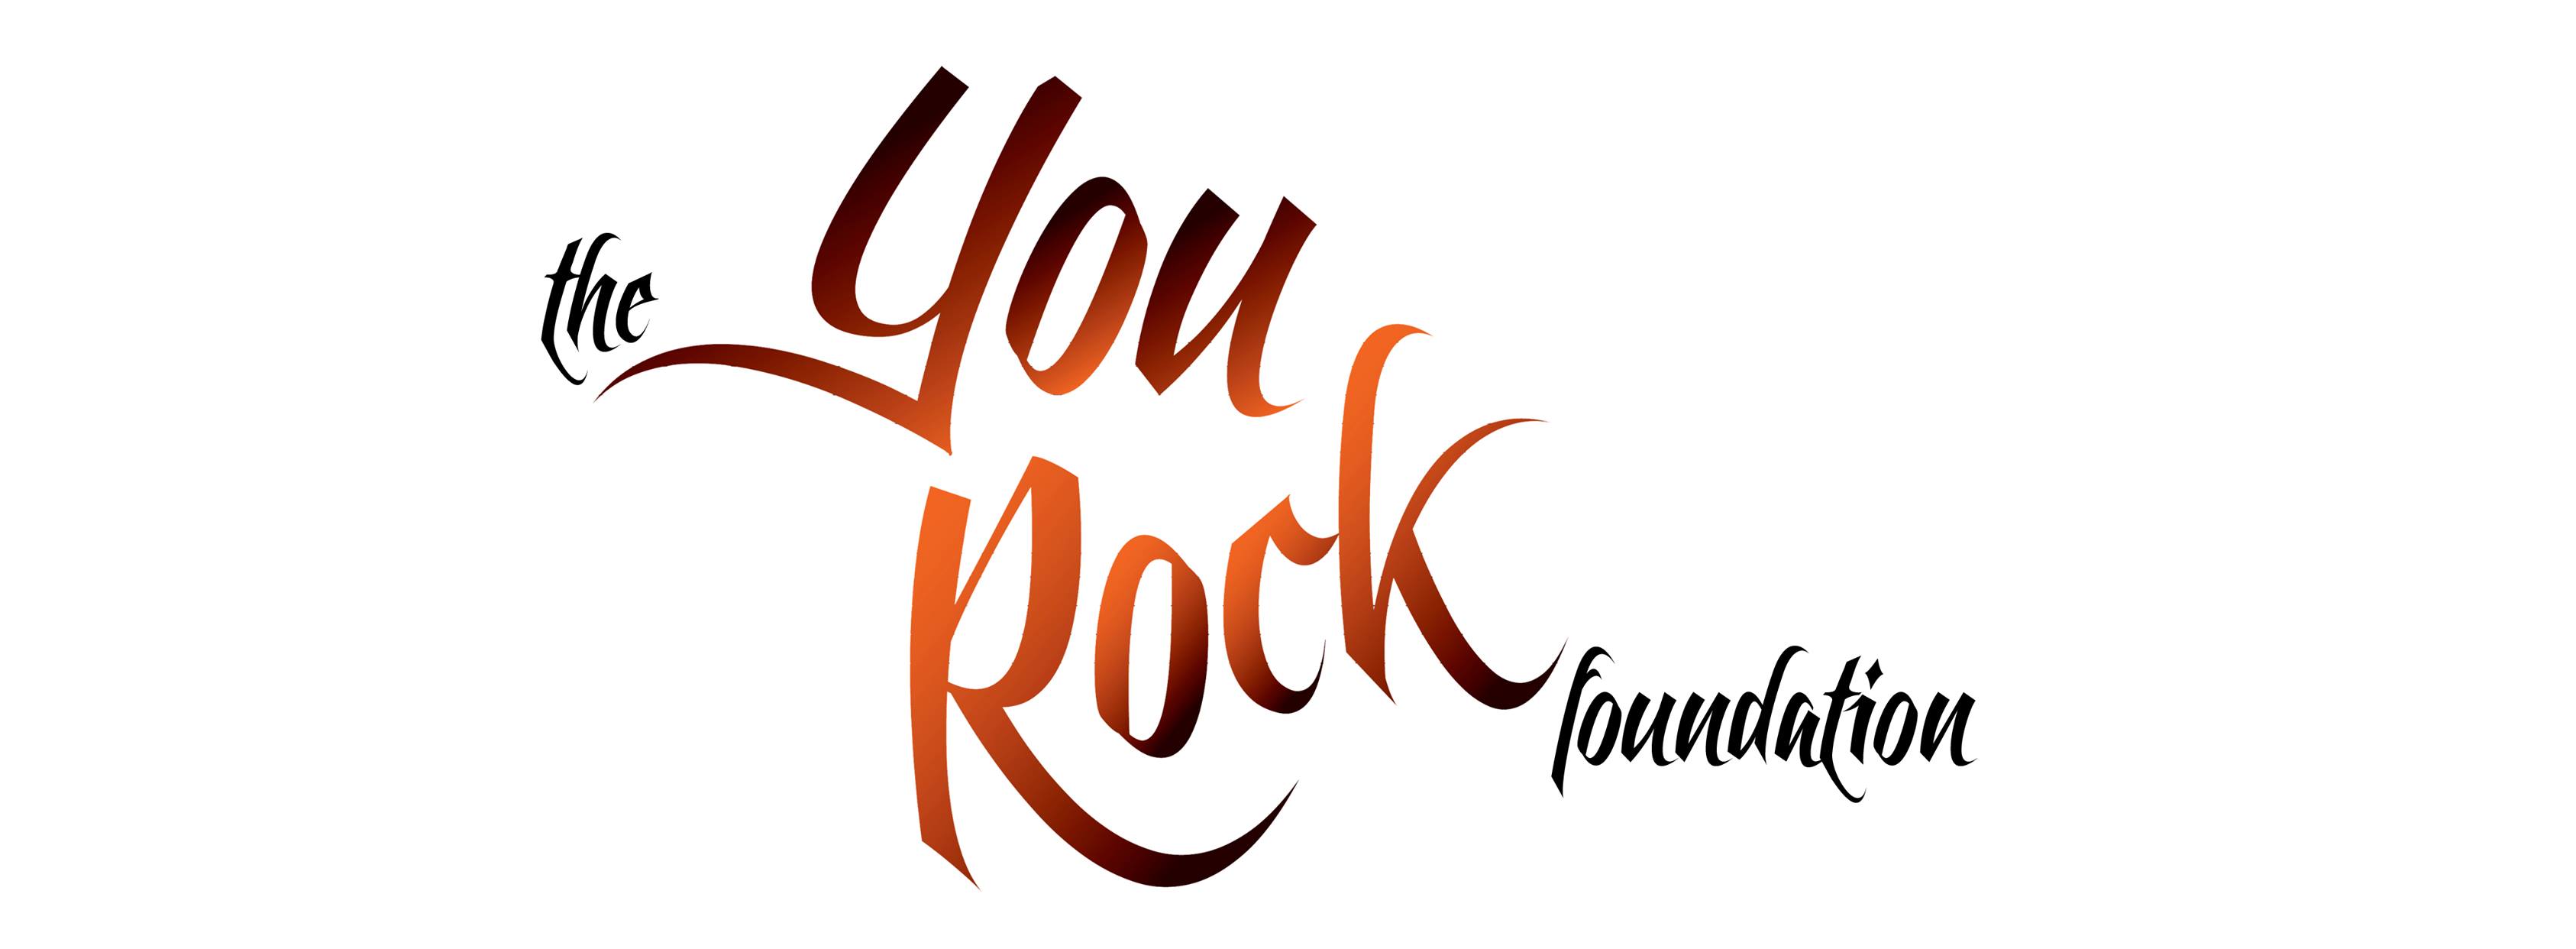 Nominee The You Rock Foundation